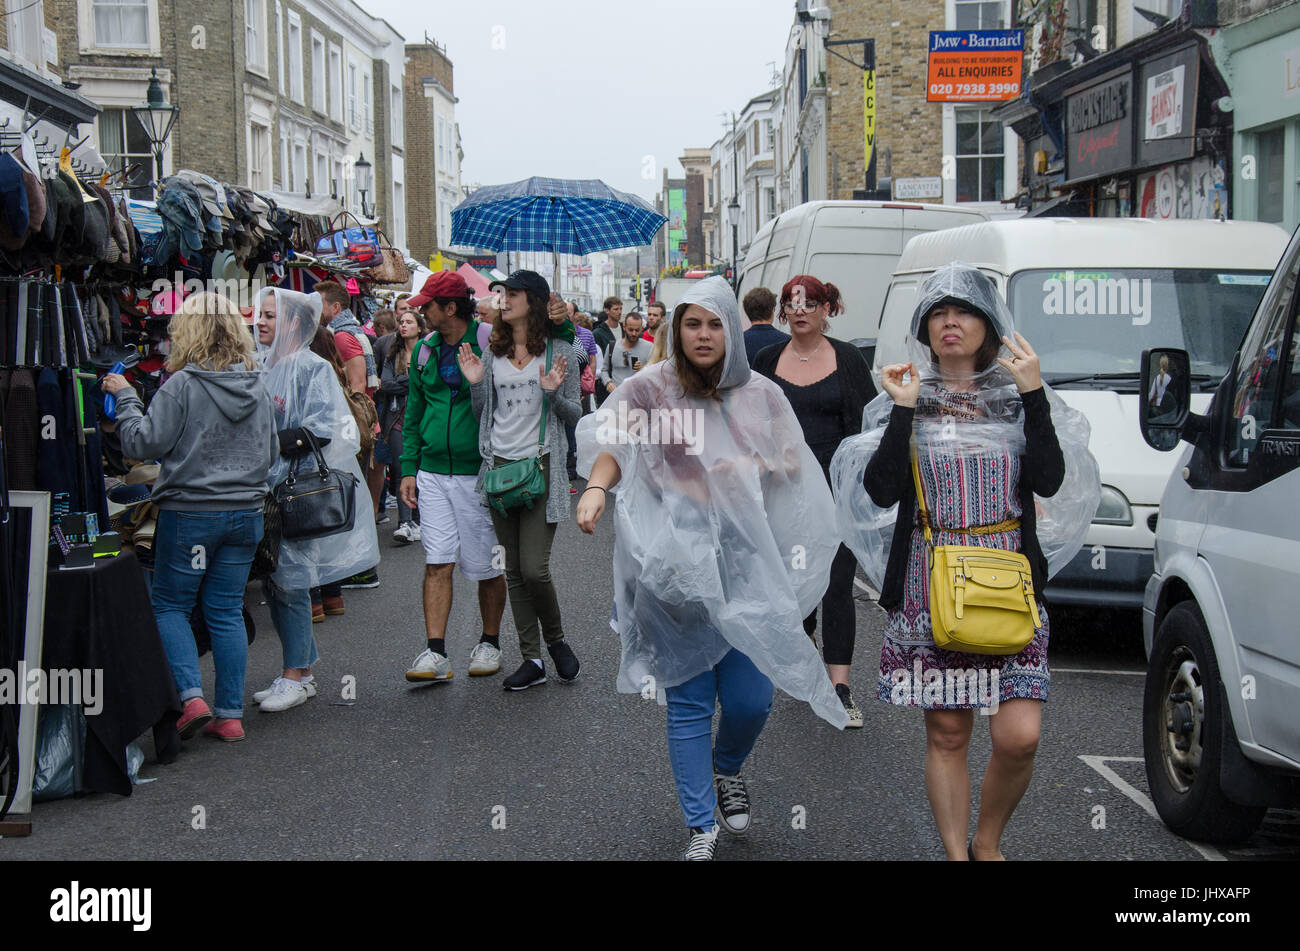 London, UK. 15th July, 2017. UK Weather: Grey clouds and passing showers in Portobello Road, London.  Matthew Ashmore/Alamy Live News Stock Photo